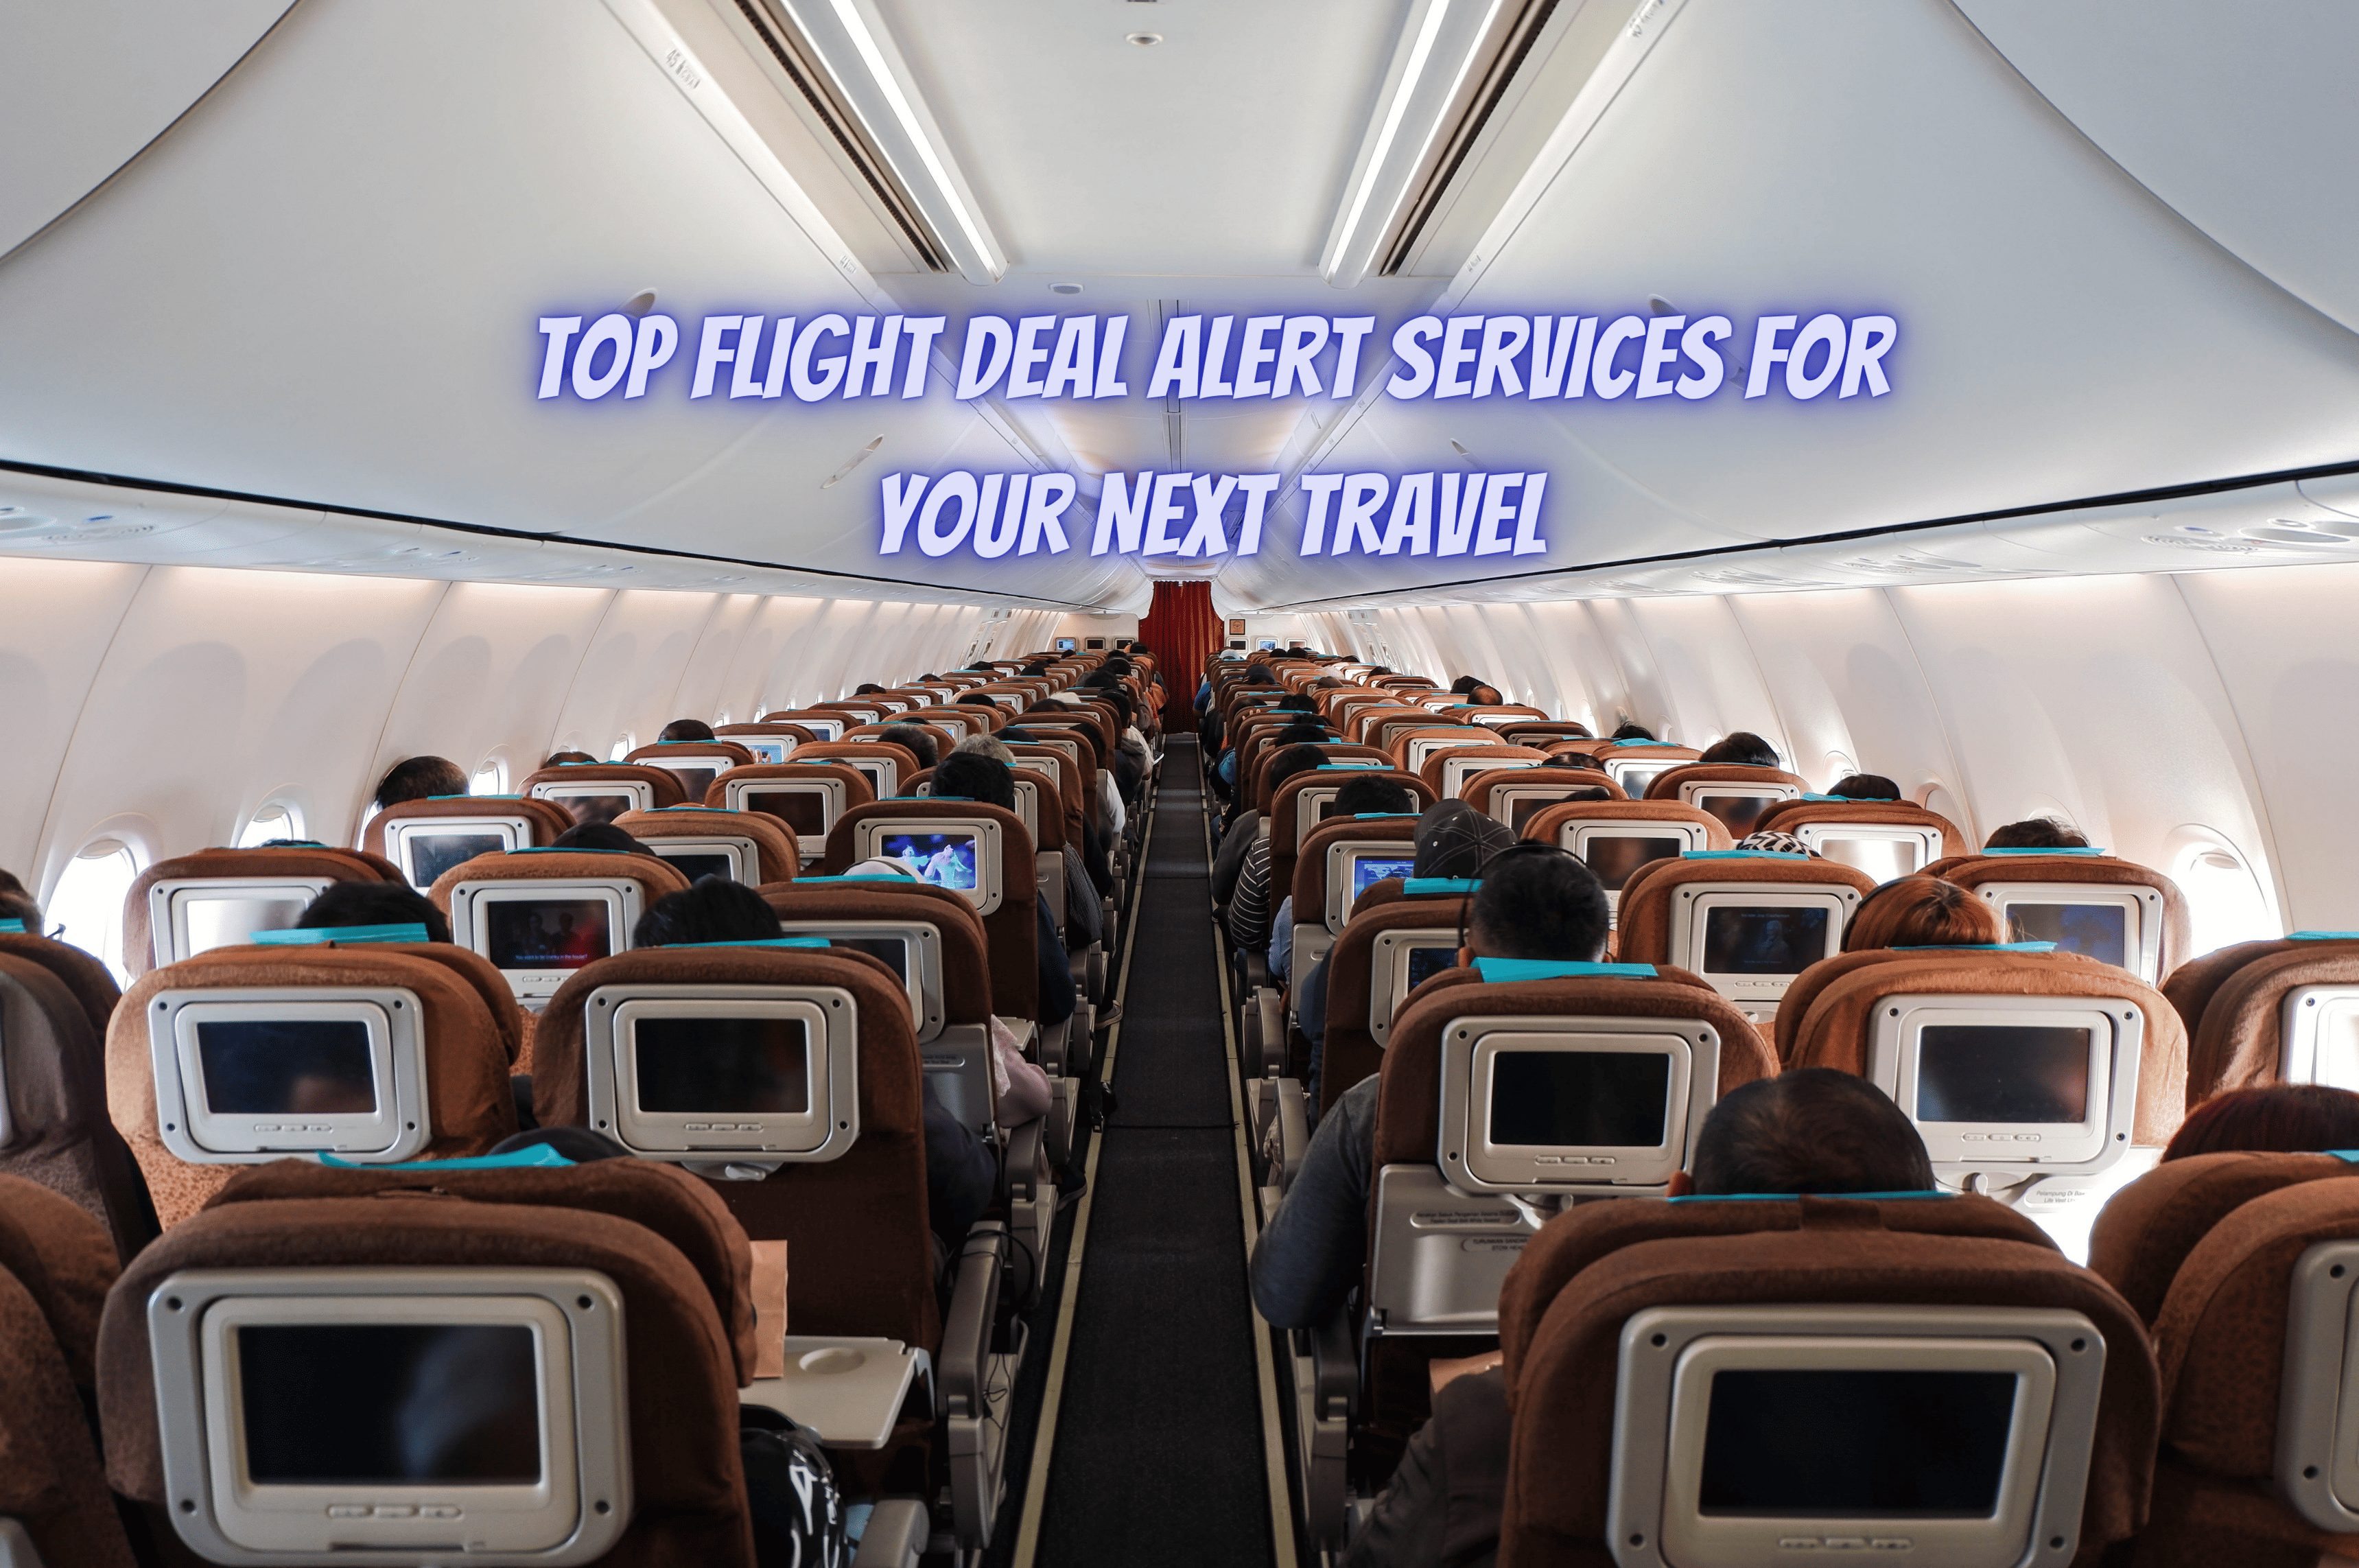 Top 10 Flight Deal Alert Services for Your Next Travel